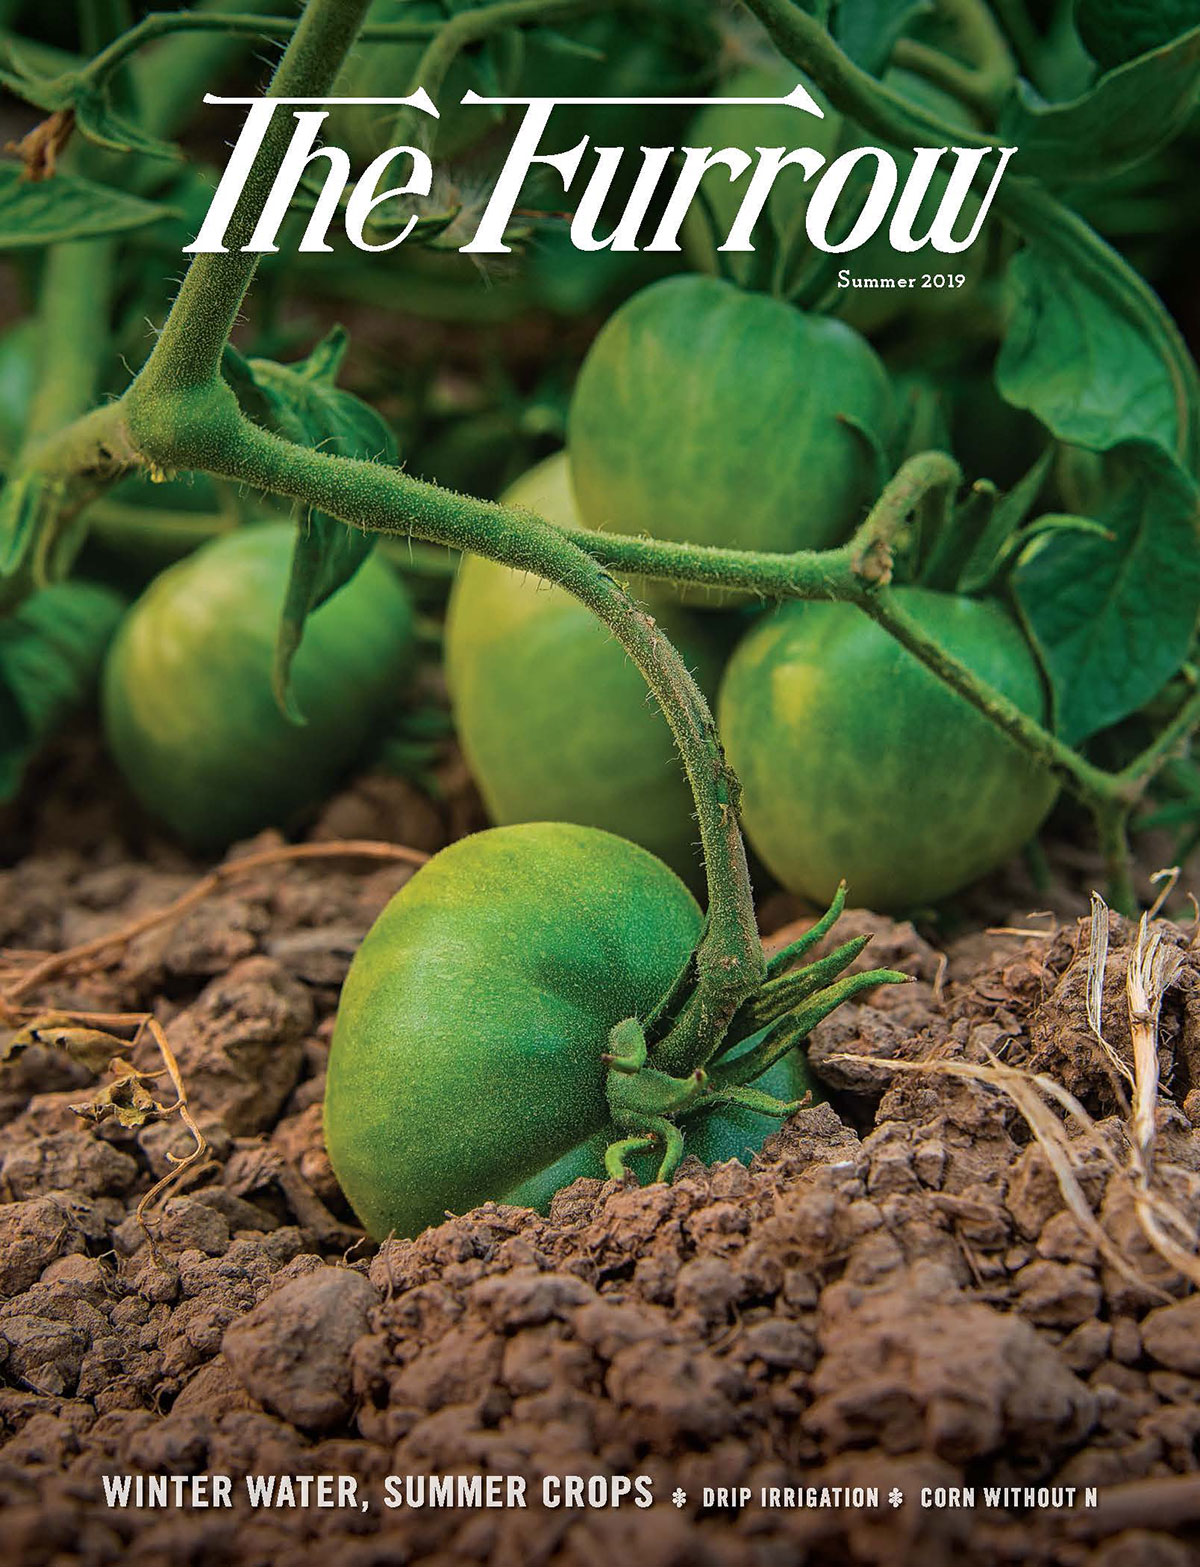 The Furrow - Summer 2019 Issue